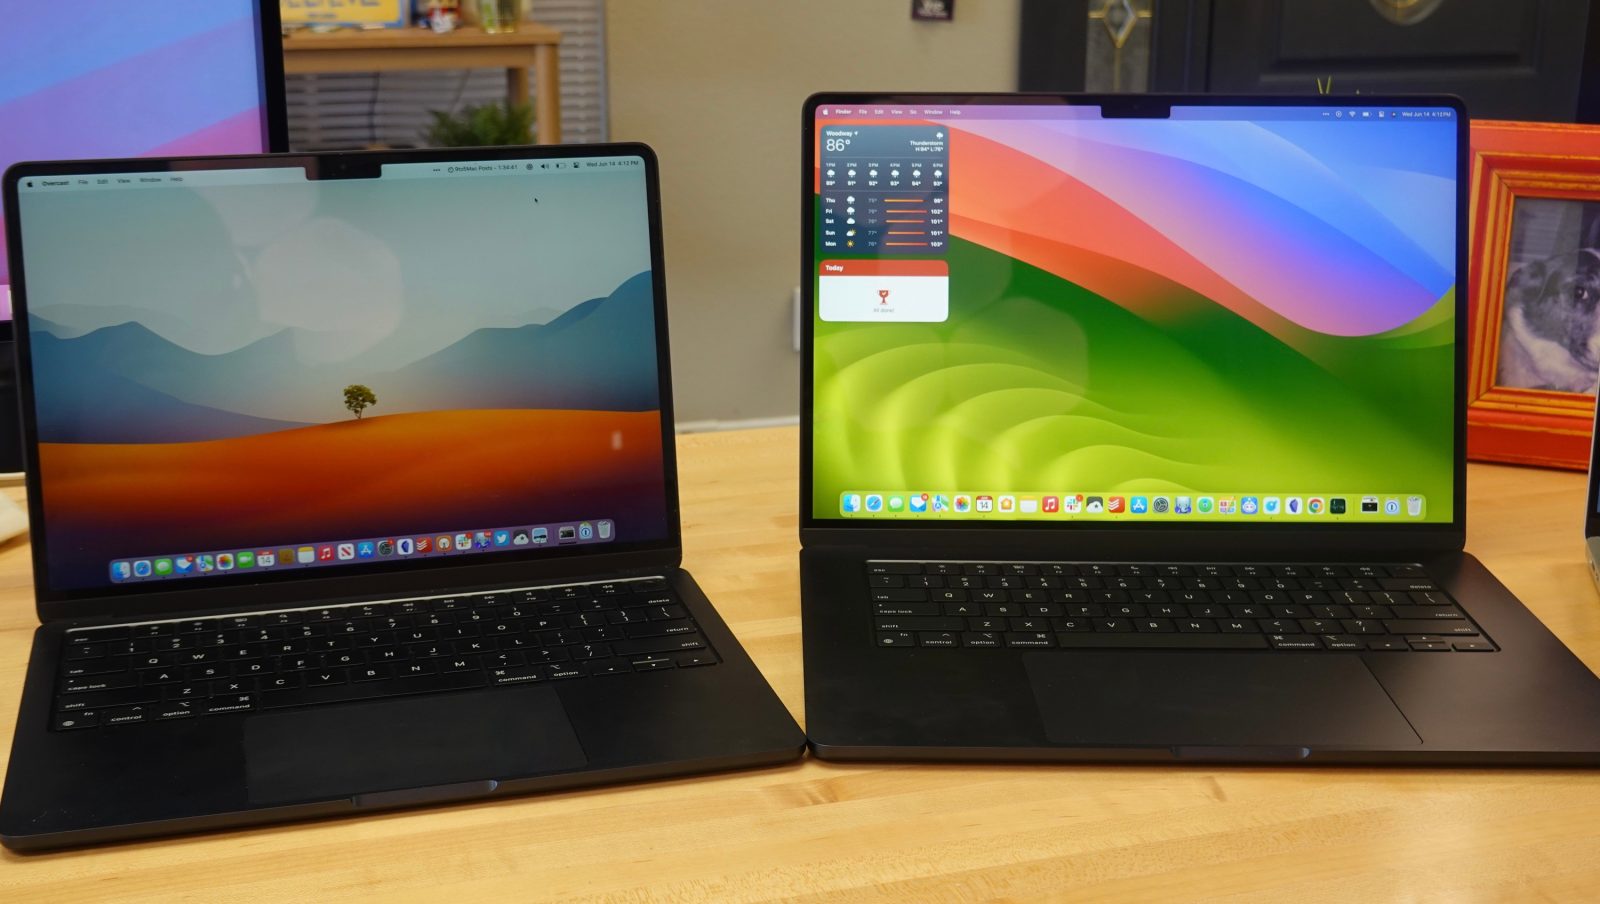 MacBook Air at WWDC 2023: Apple unveils 15-inch model